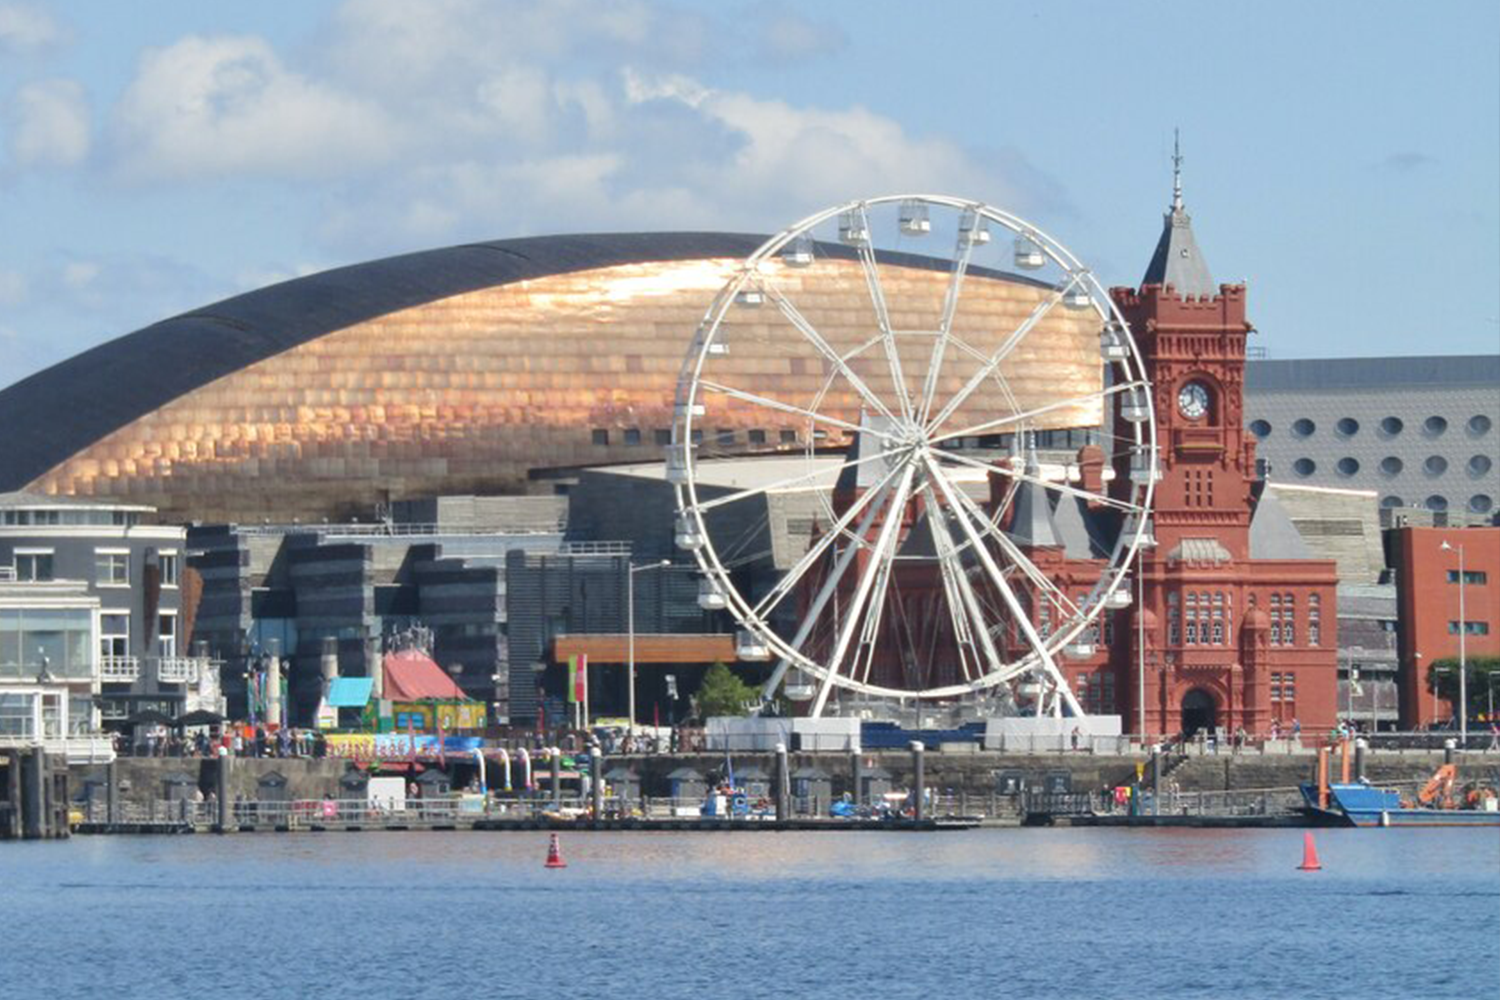 Trivallis Housing Landlord Wales A ferris wheel and a distinctive red brick housing building stand in front of an arena with a reflective dome, along a waterfront.